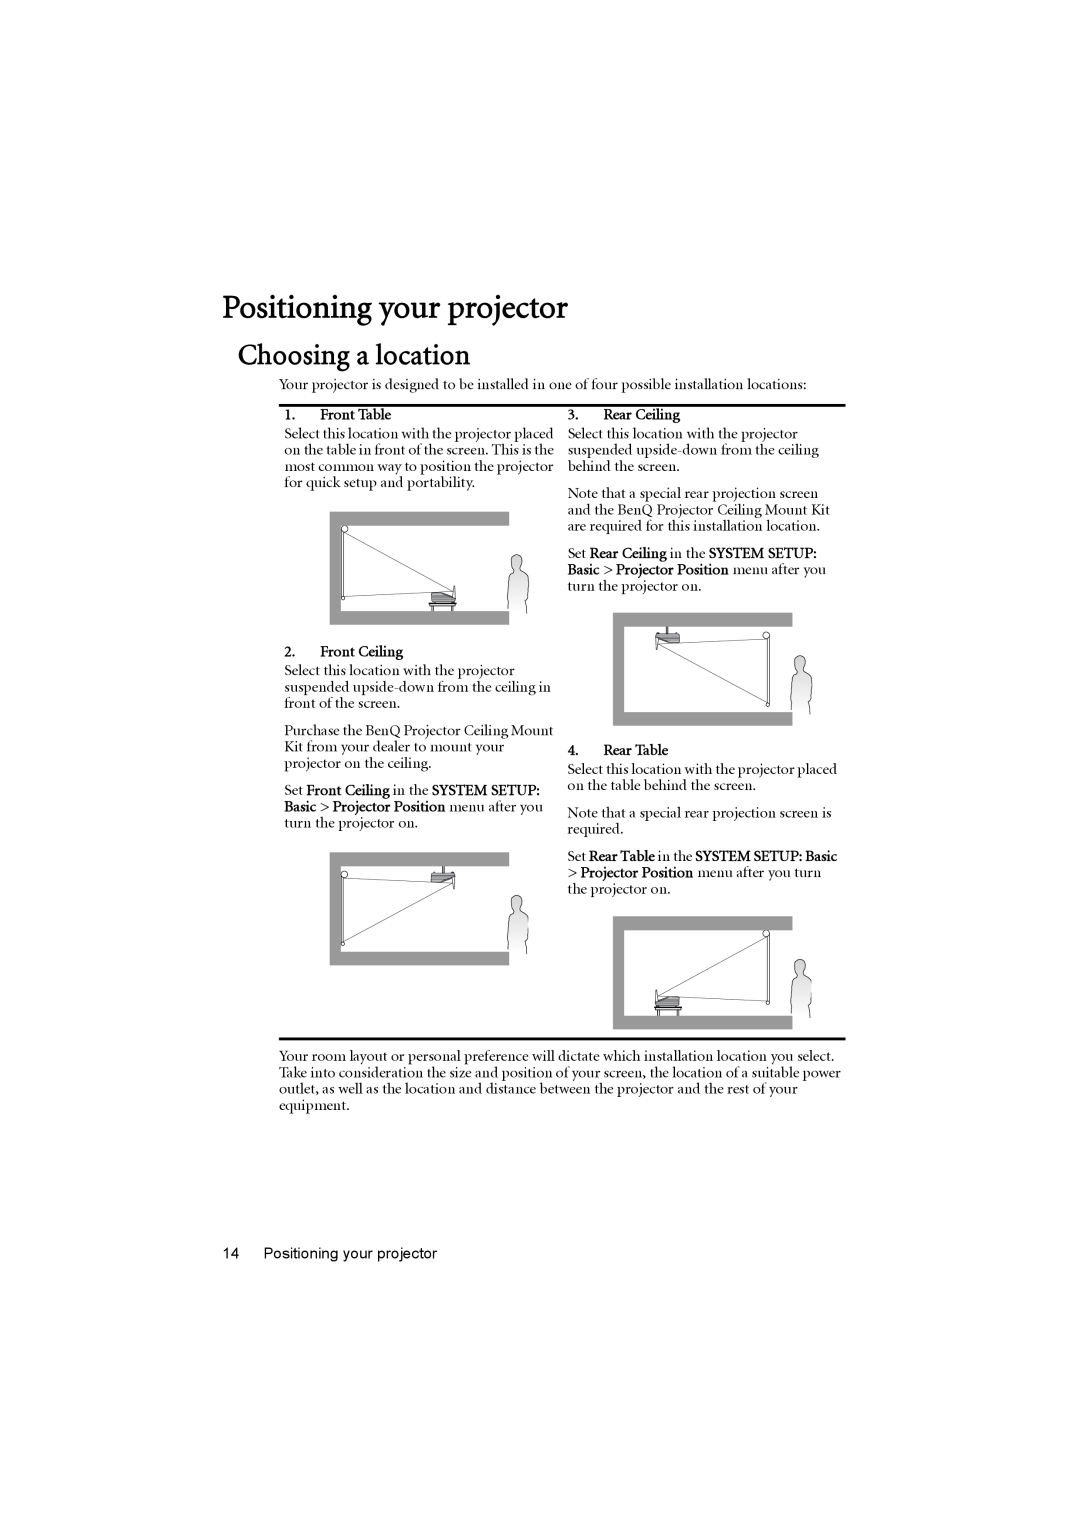 BenQ MX880UST user manual Positioning your projector, Choosing a location 